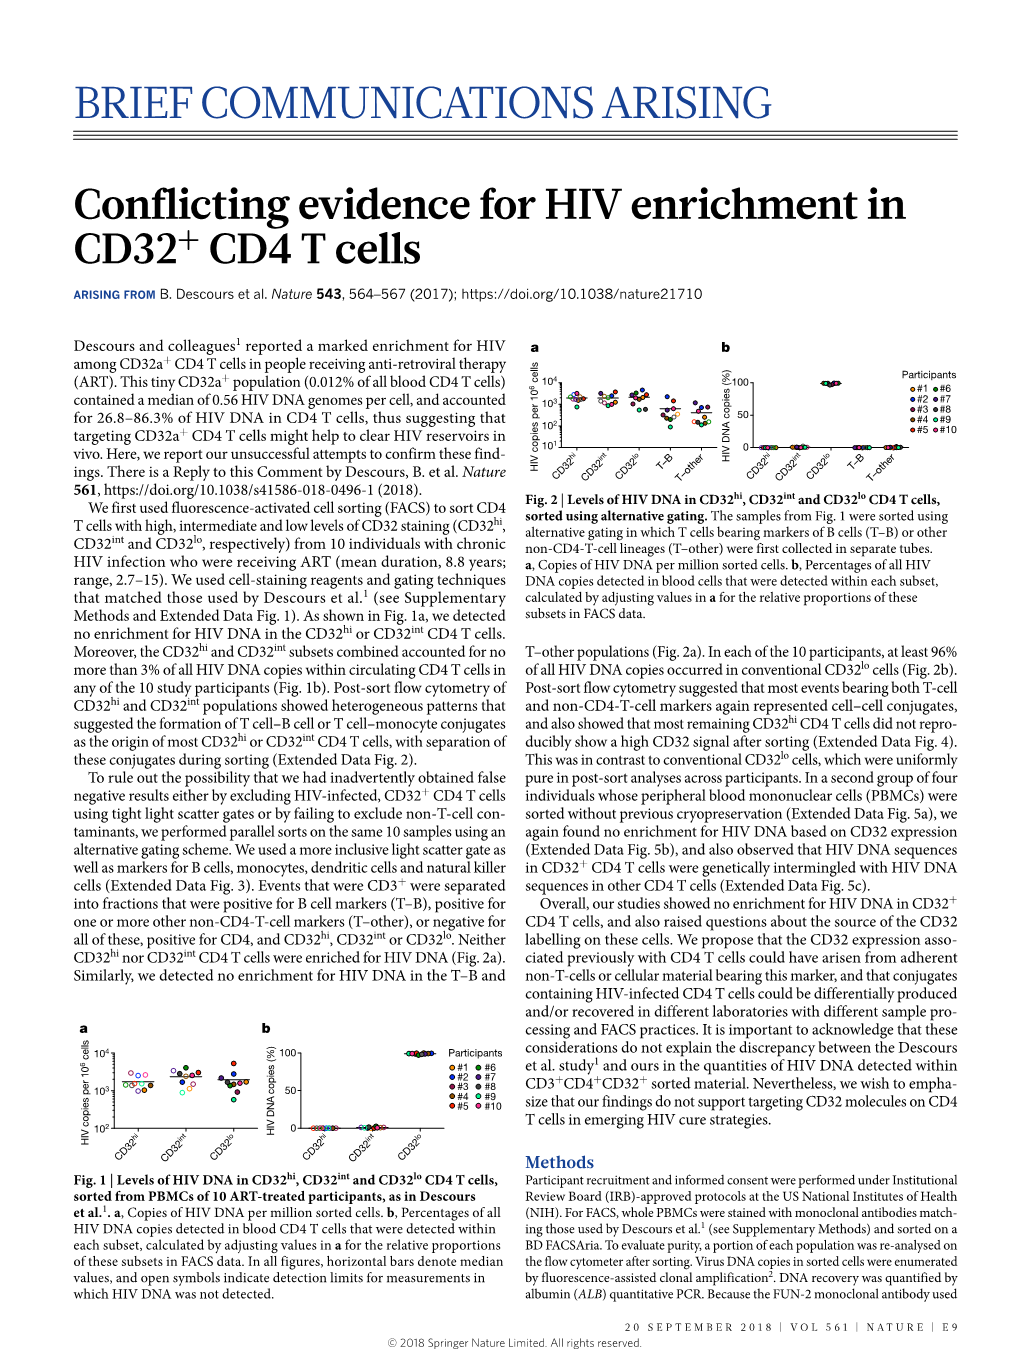 Conflicting Evidence for HIV Enrichment in CD32+ CD4 T Cells Arising from B